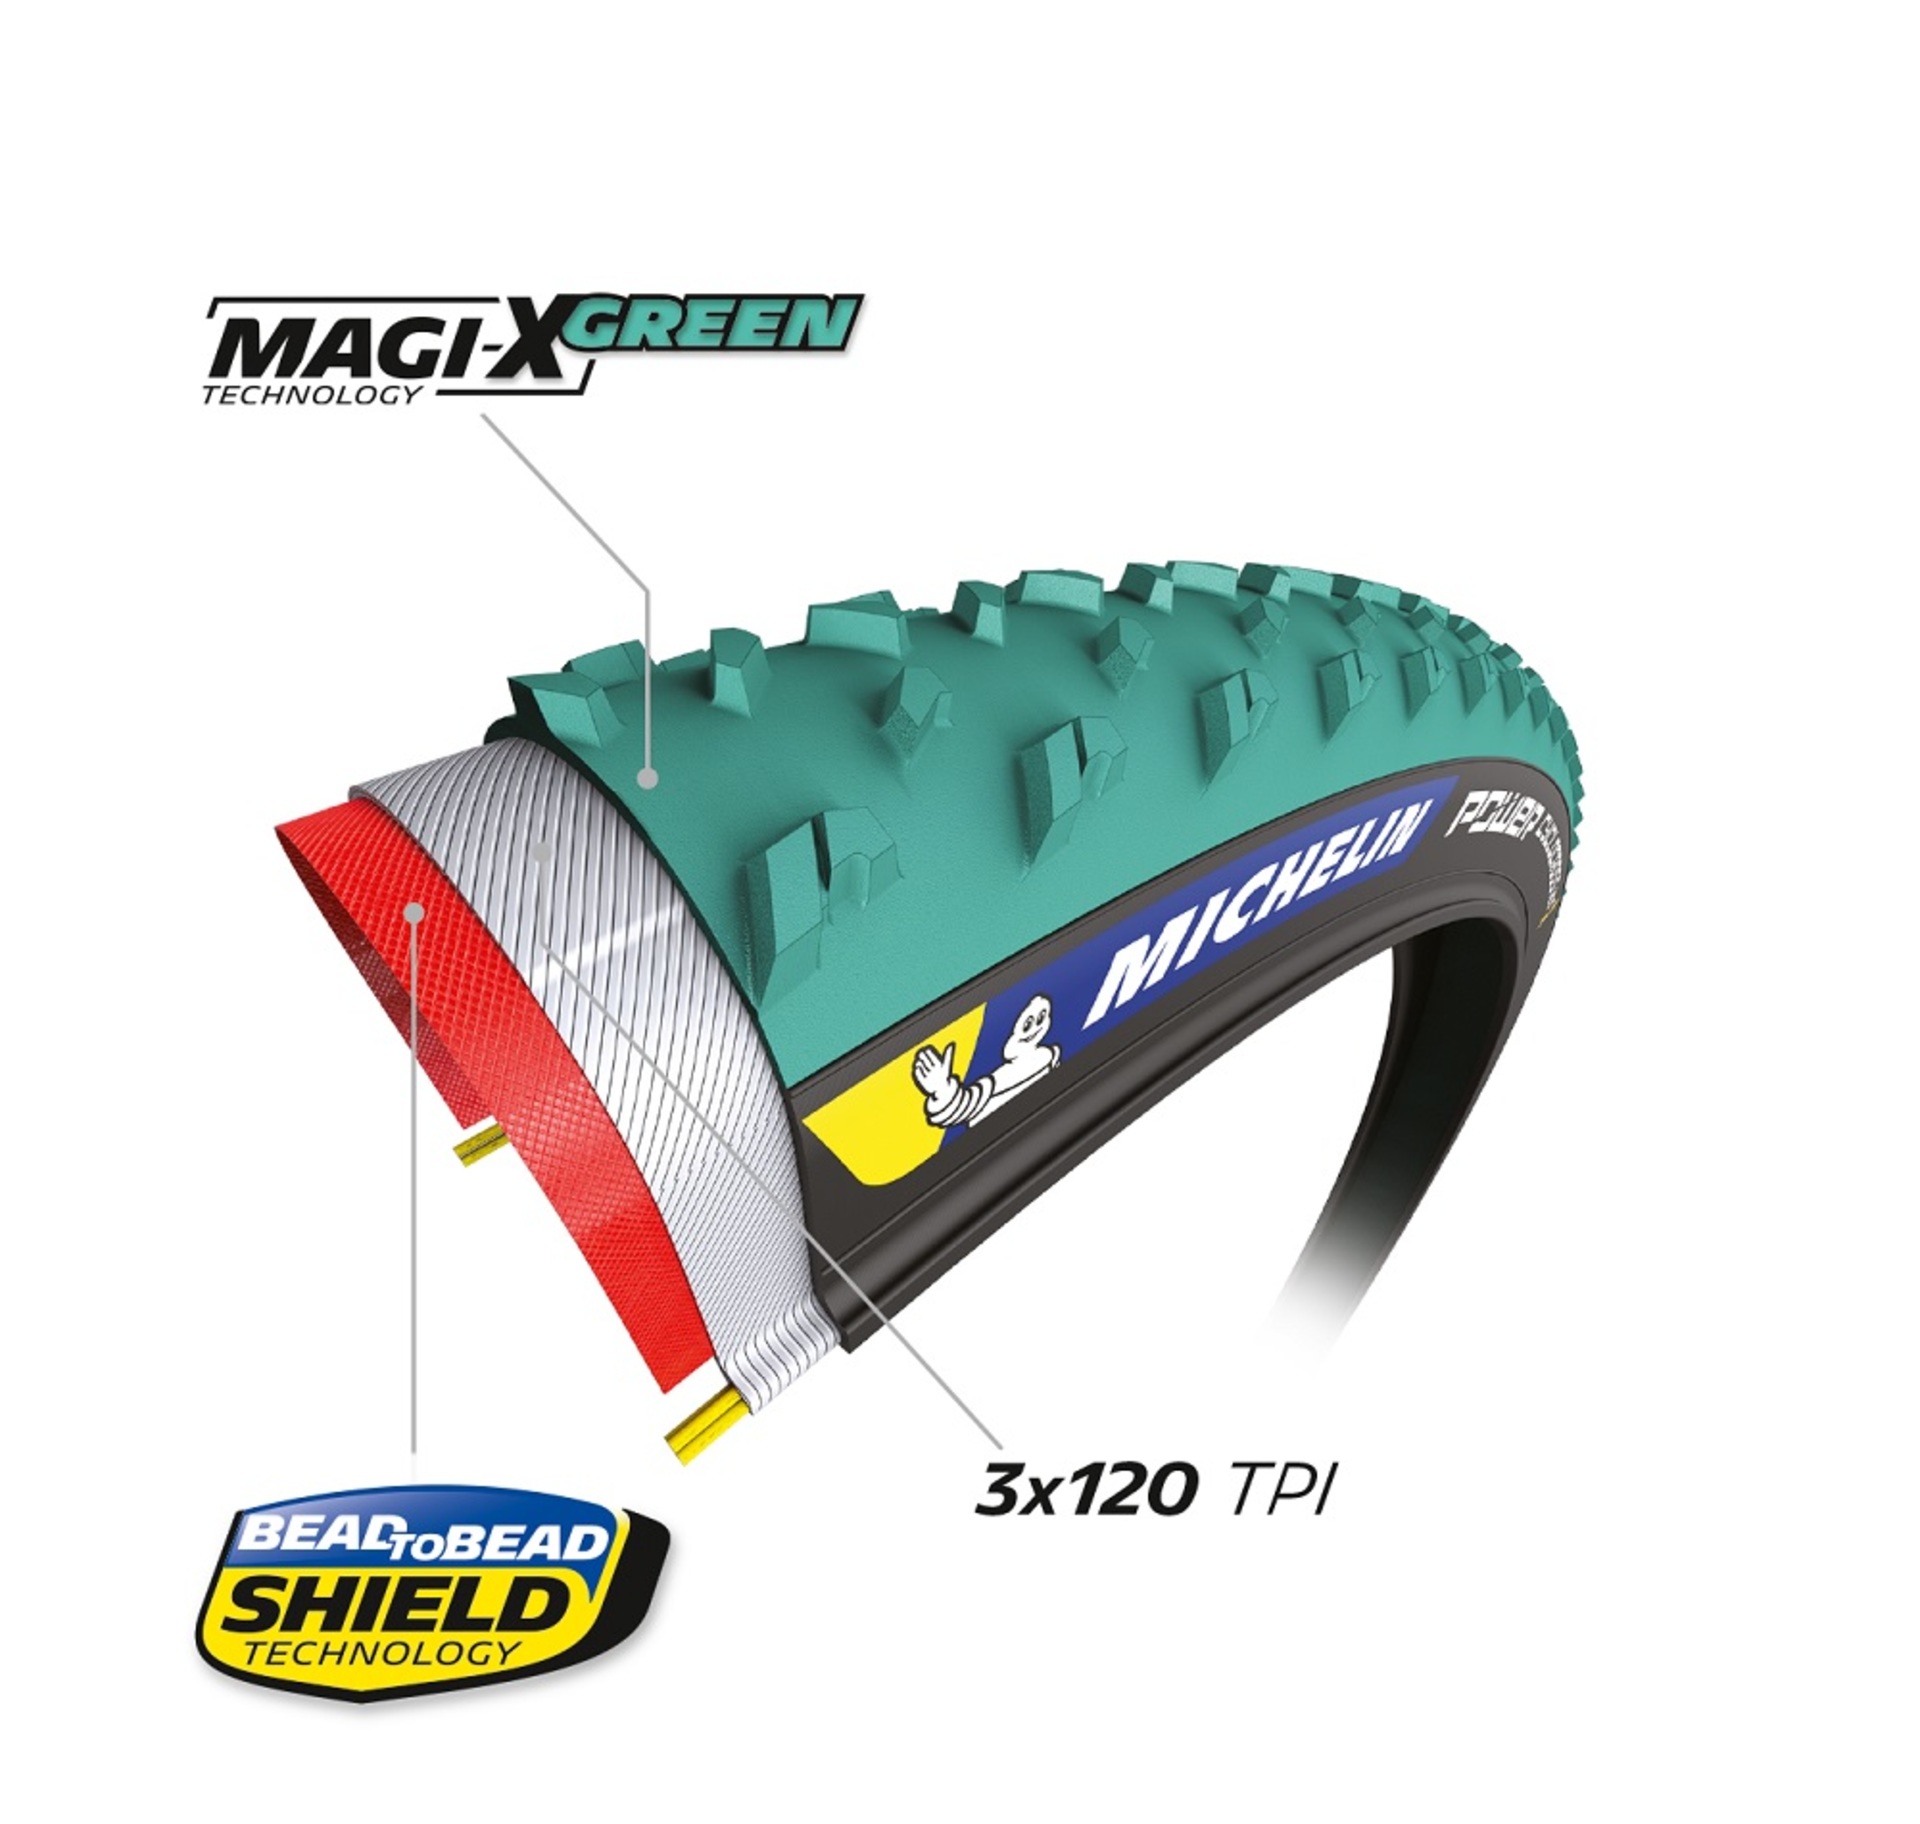 Michelin Power CC Mud TLR Cyclocross Vouwband Groen